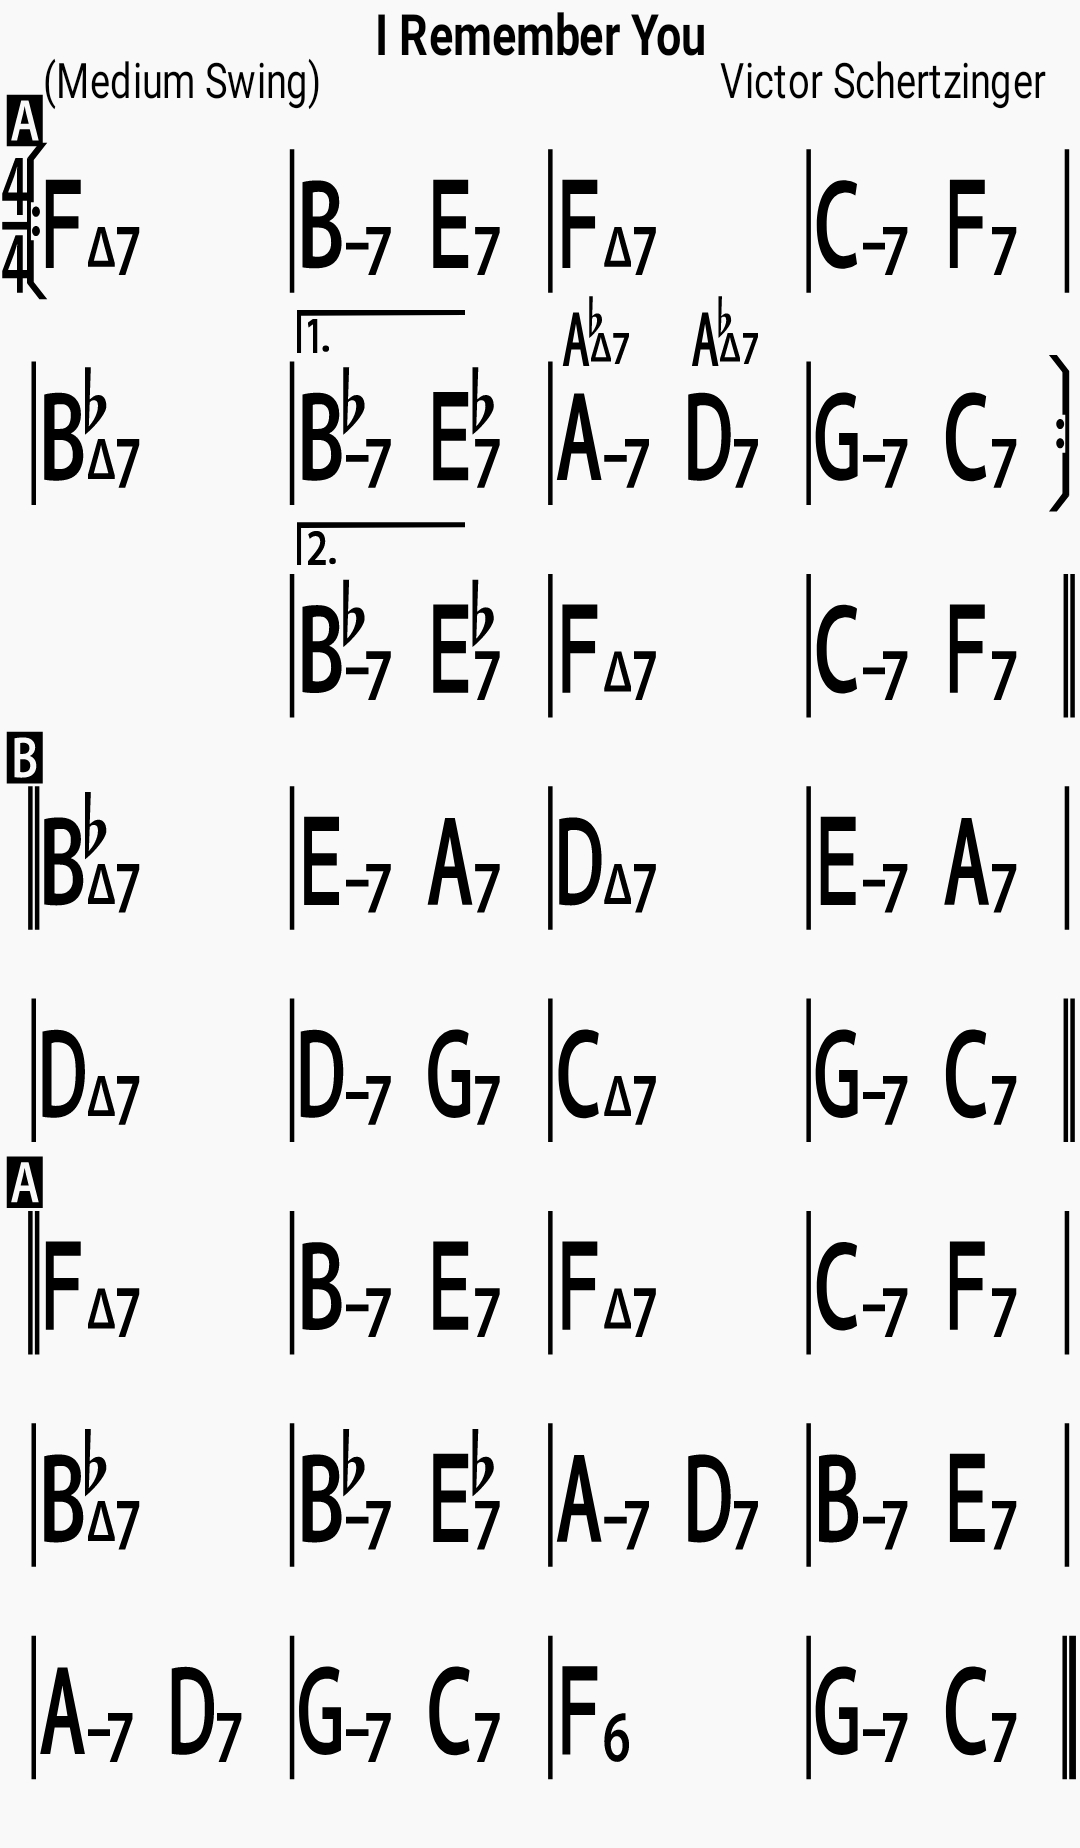 Chord chart for the jazz standard I Remember You